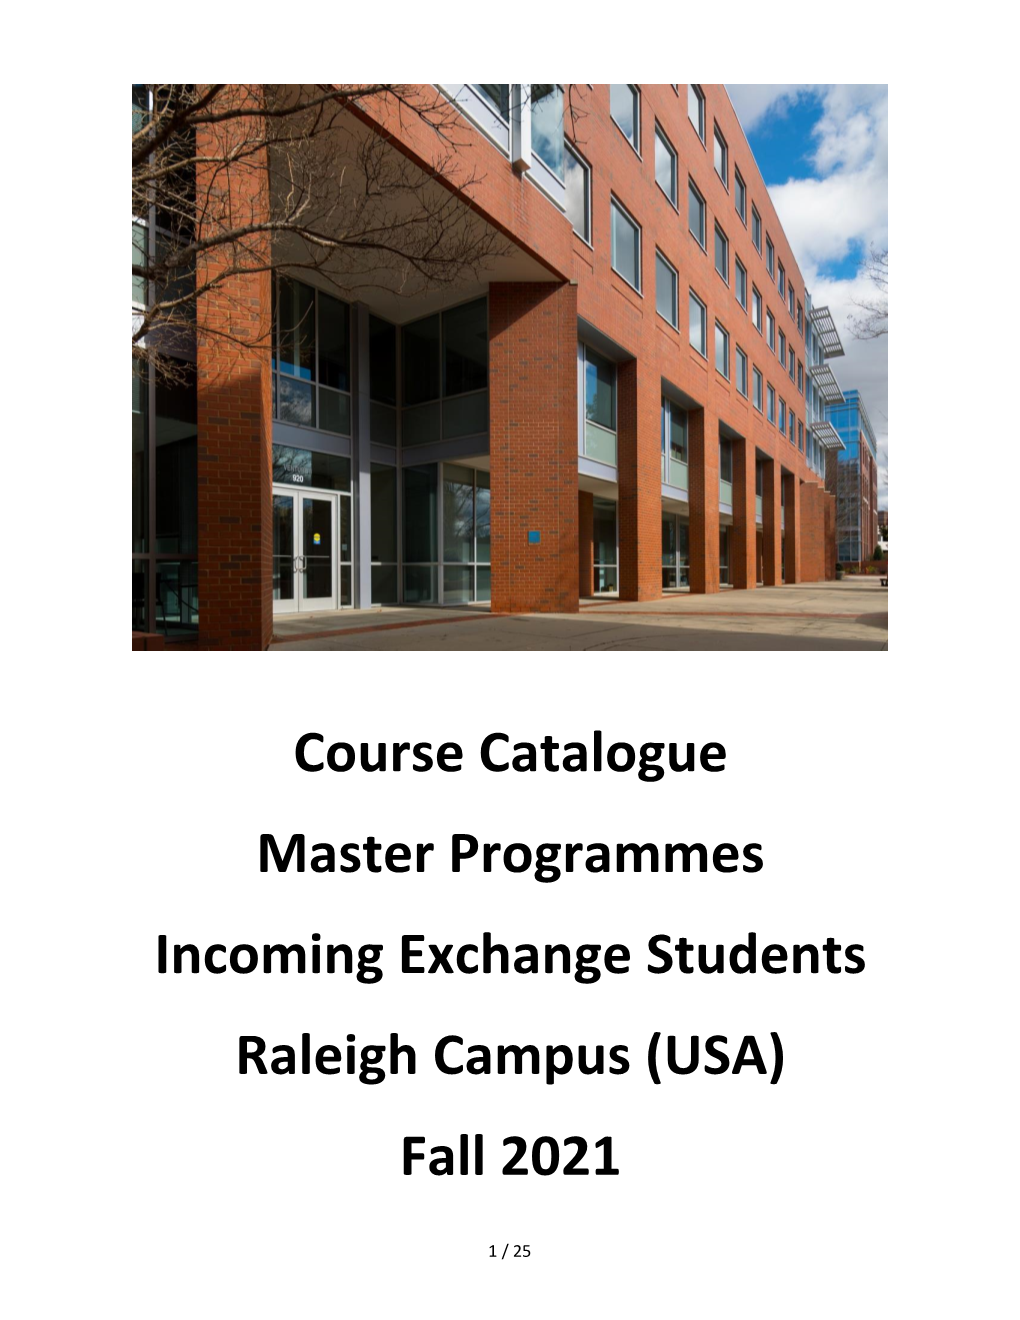 Course Catalogue Master Programmes Incoming Exchange Students Raleigh Campus (USA) Fall 2021